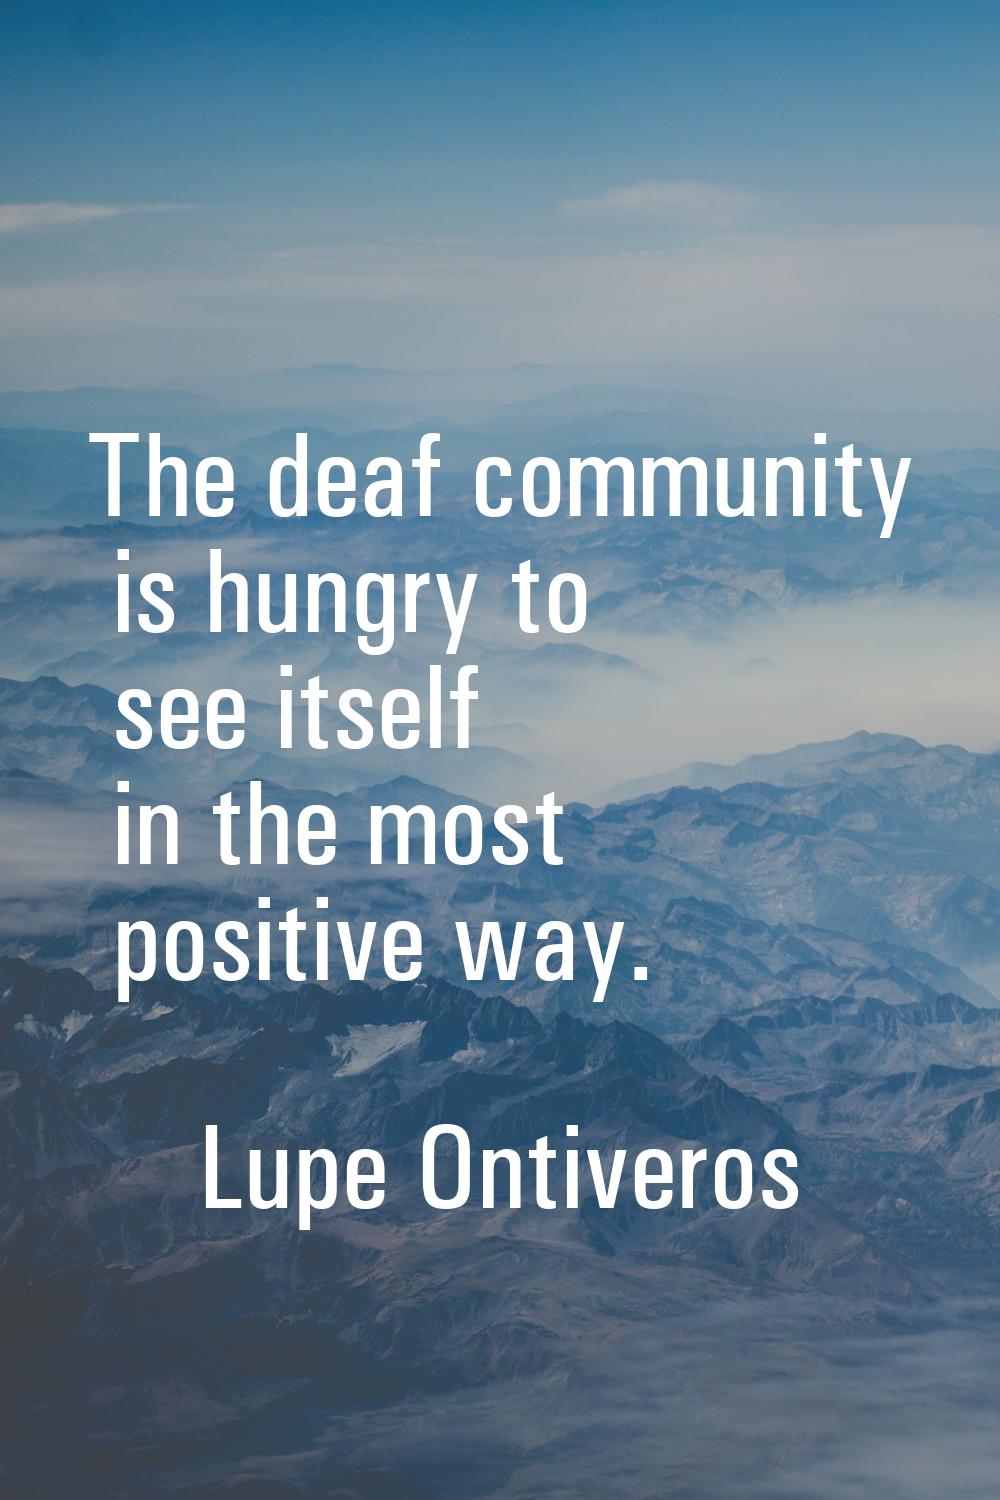 The deaf community is hungry to see itself in the most positive way.